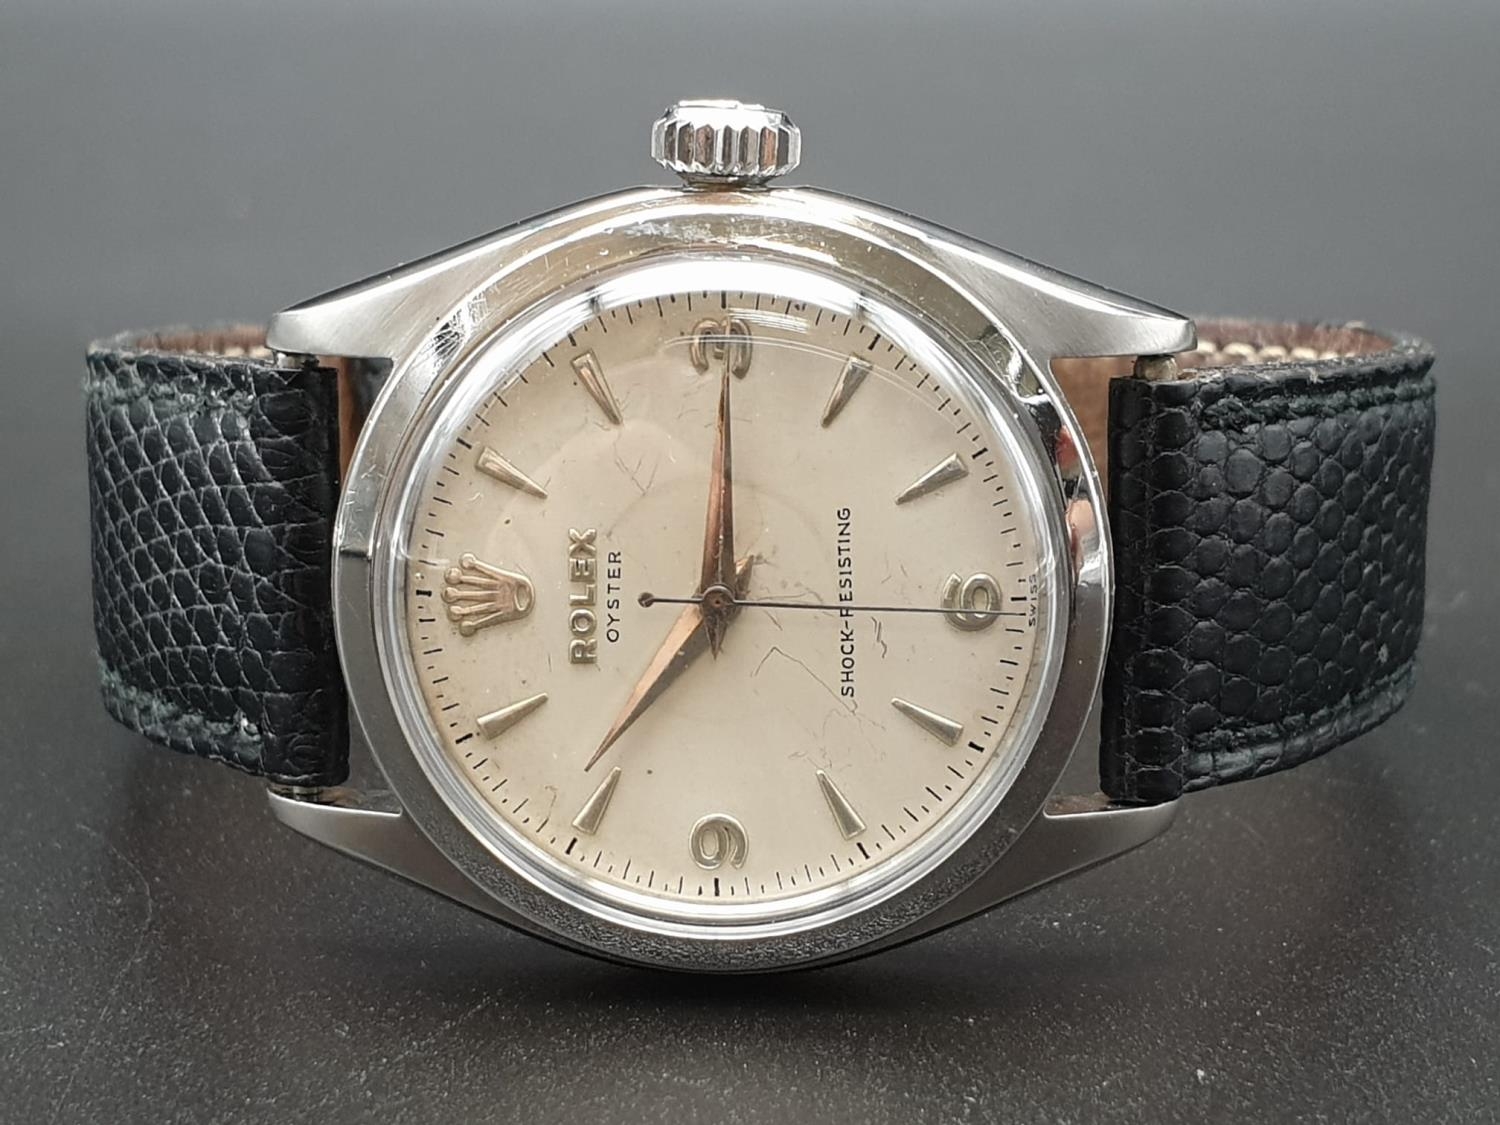 A VINTAGE ROLEX GENTS AUTOMATIC STAINLESS STEEL WATCH WITH A KLARLUND LEATHER STRAP 34MM FWO - Image 4 of 11